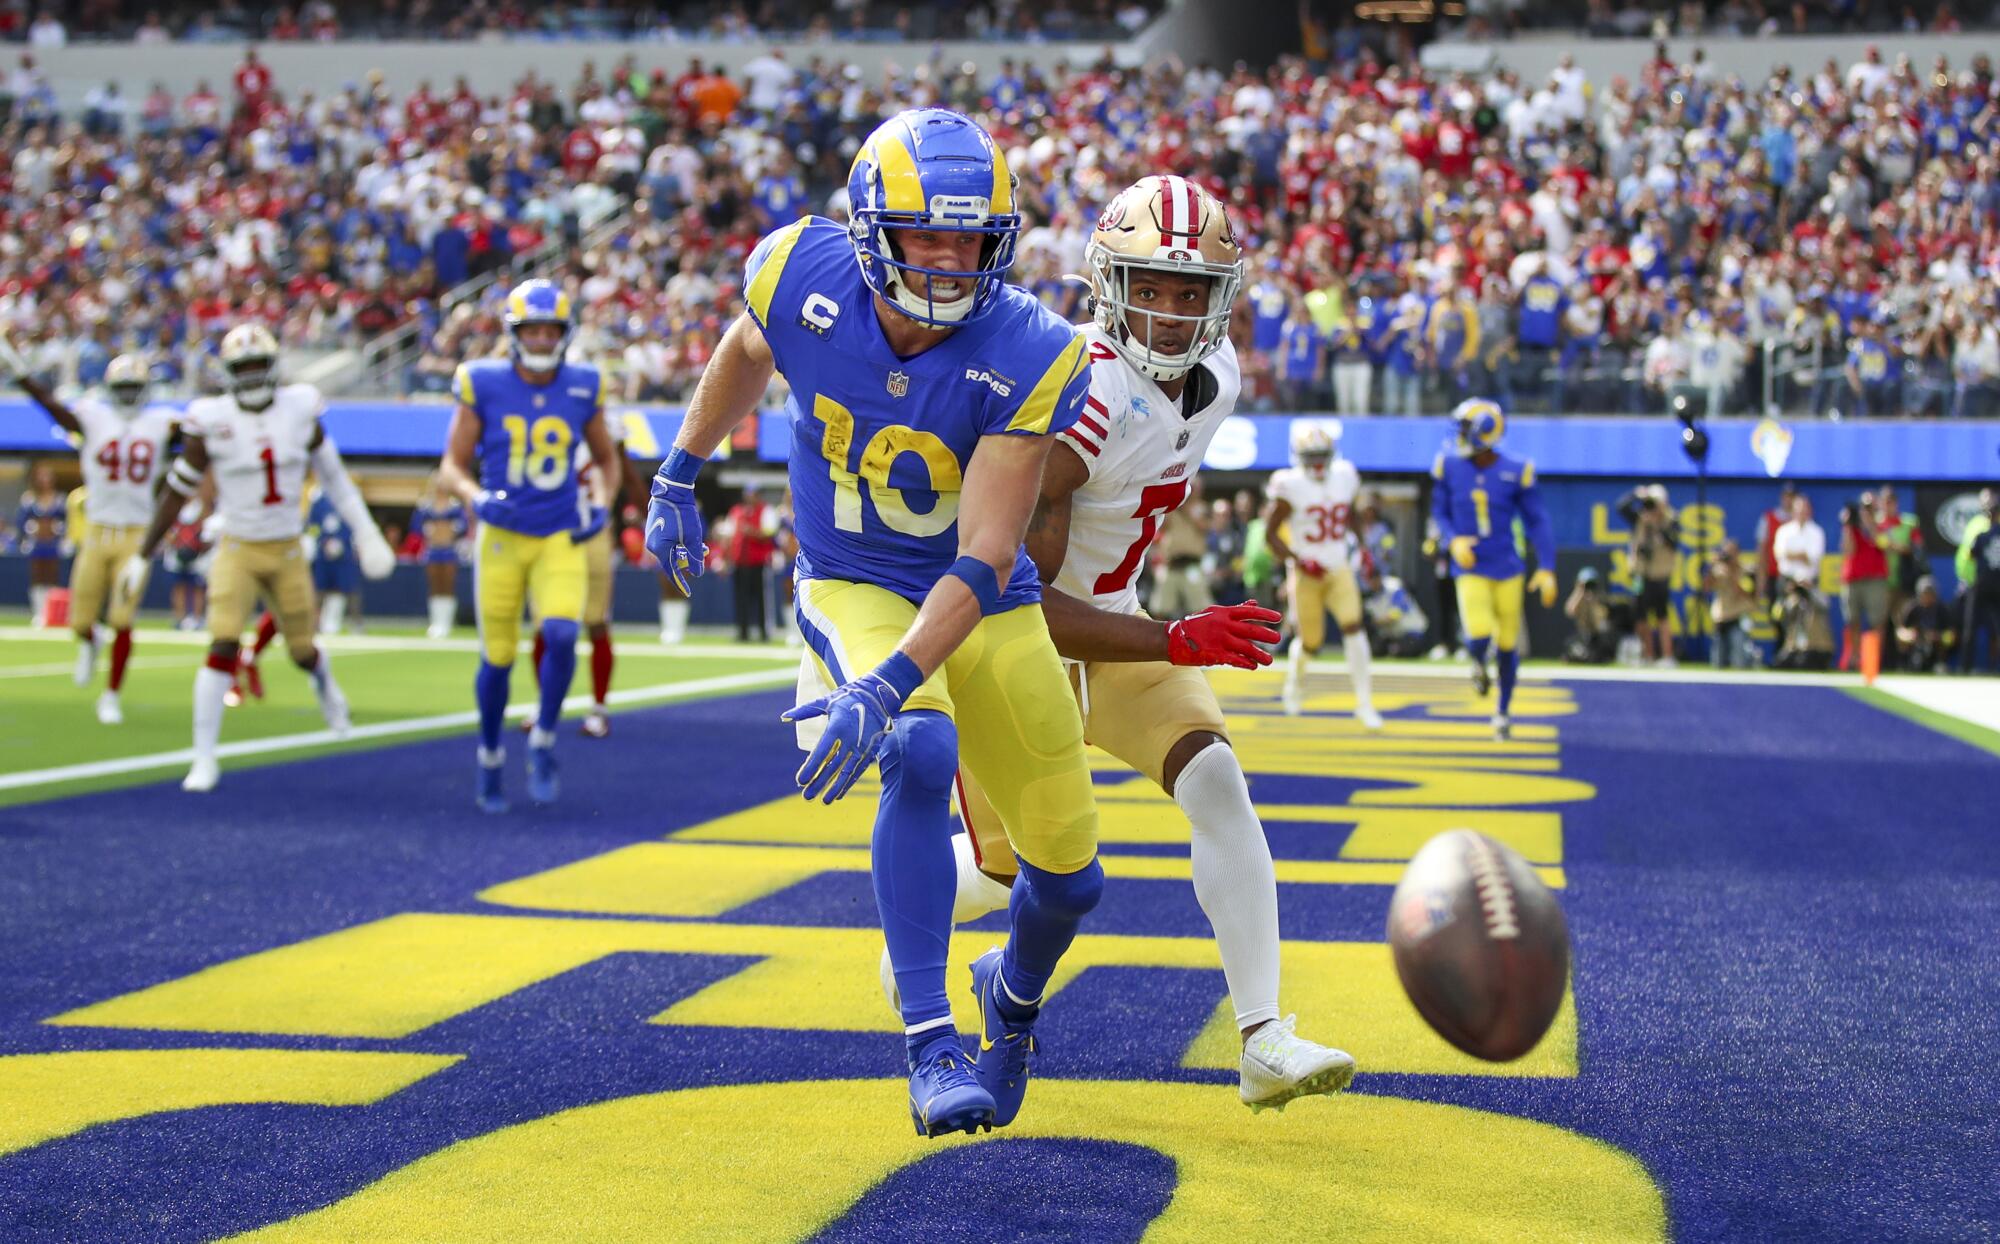 Rams wide receiver Cooper Kupp can't reach a pass in the first half as 49ers defender Charvarius Ward watches.